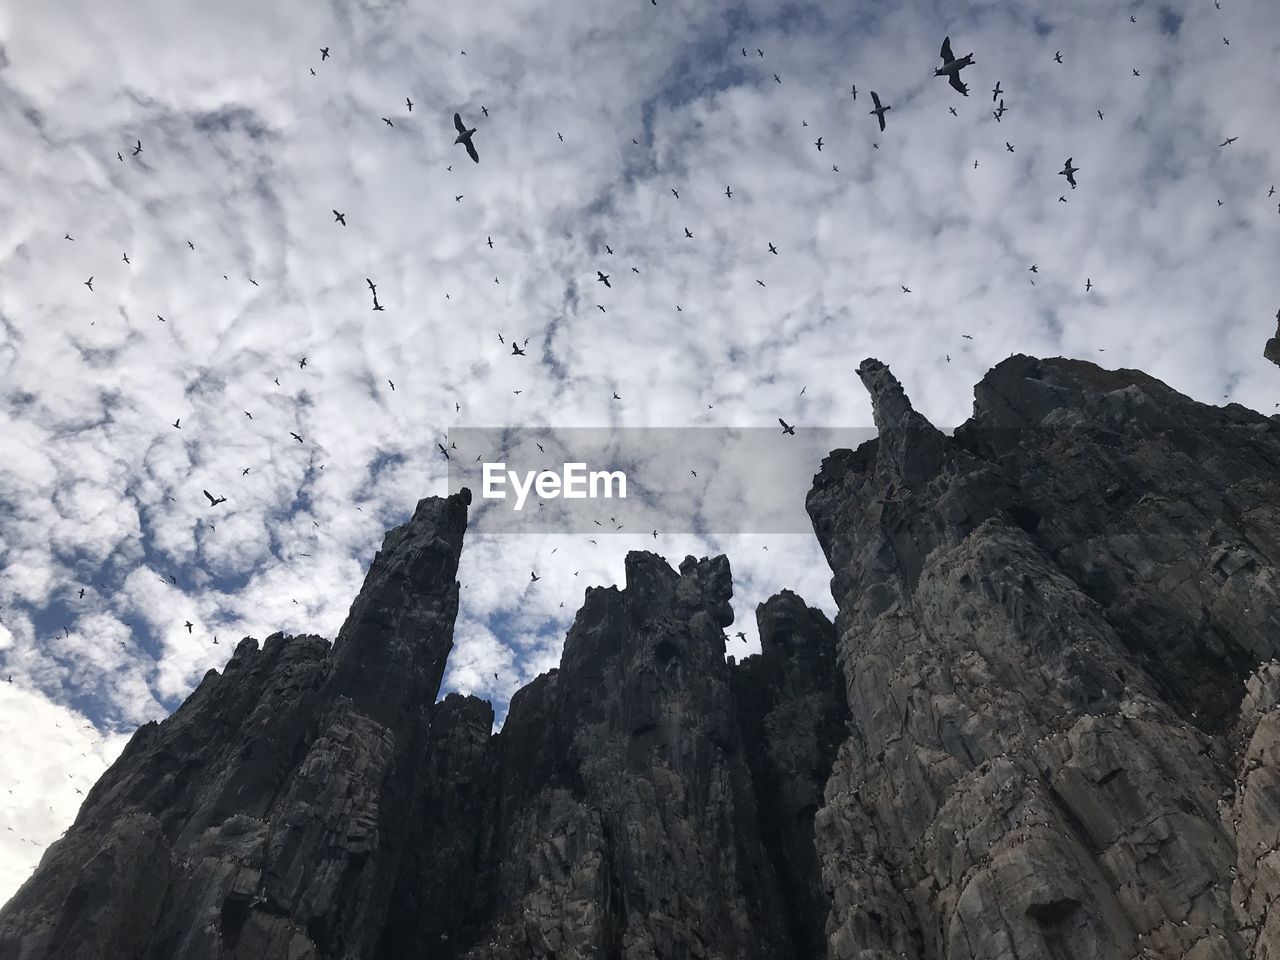 Low angle view of silhouette birds flying over mountains against cloudy sky